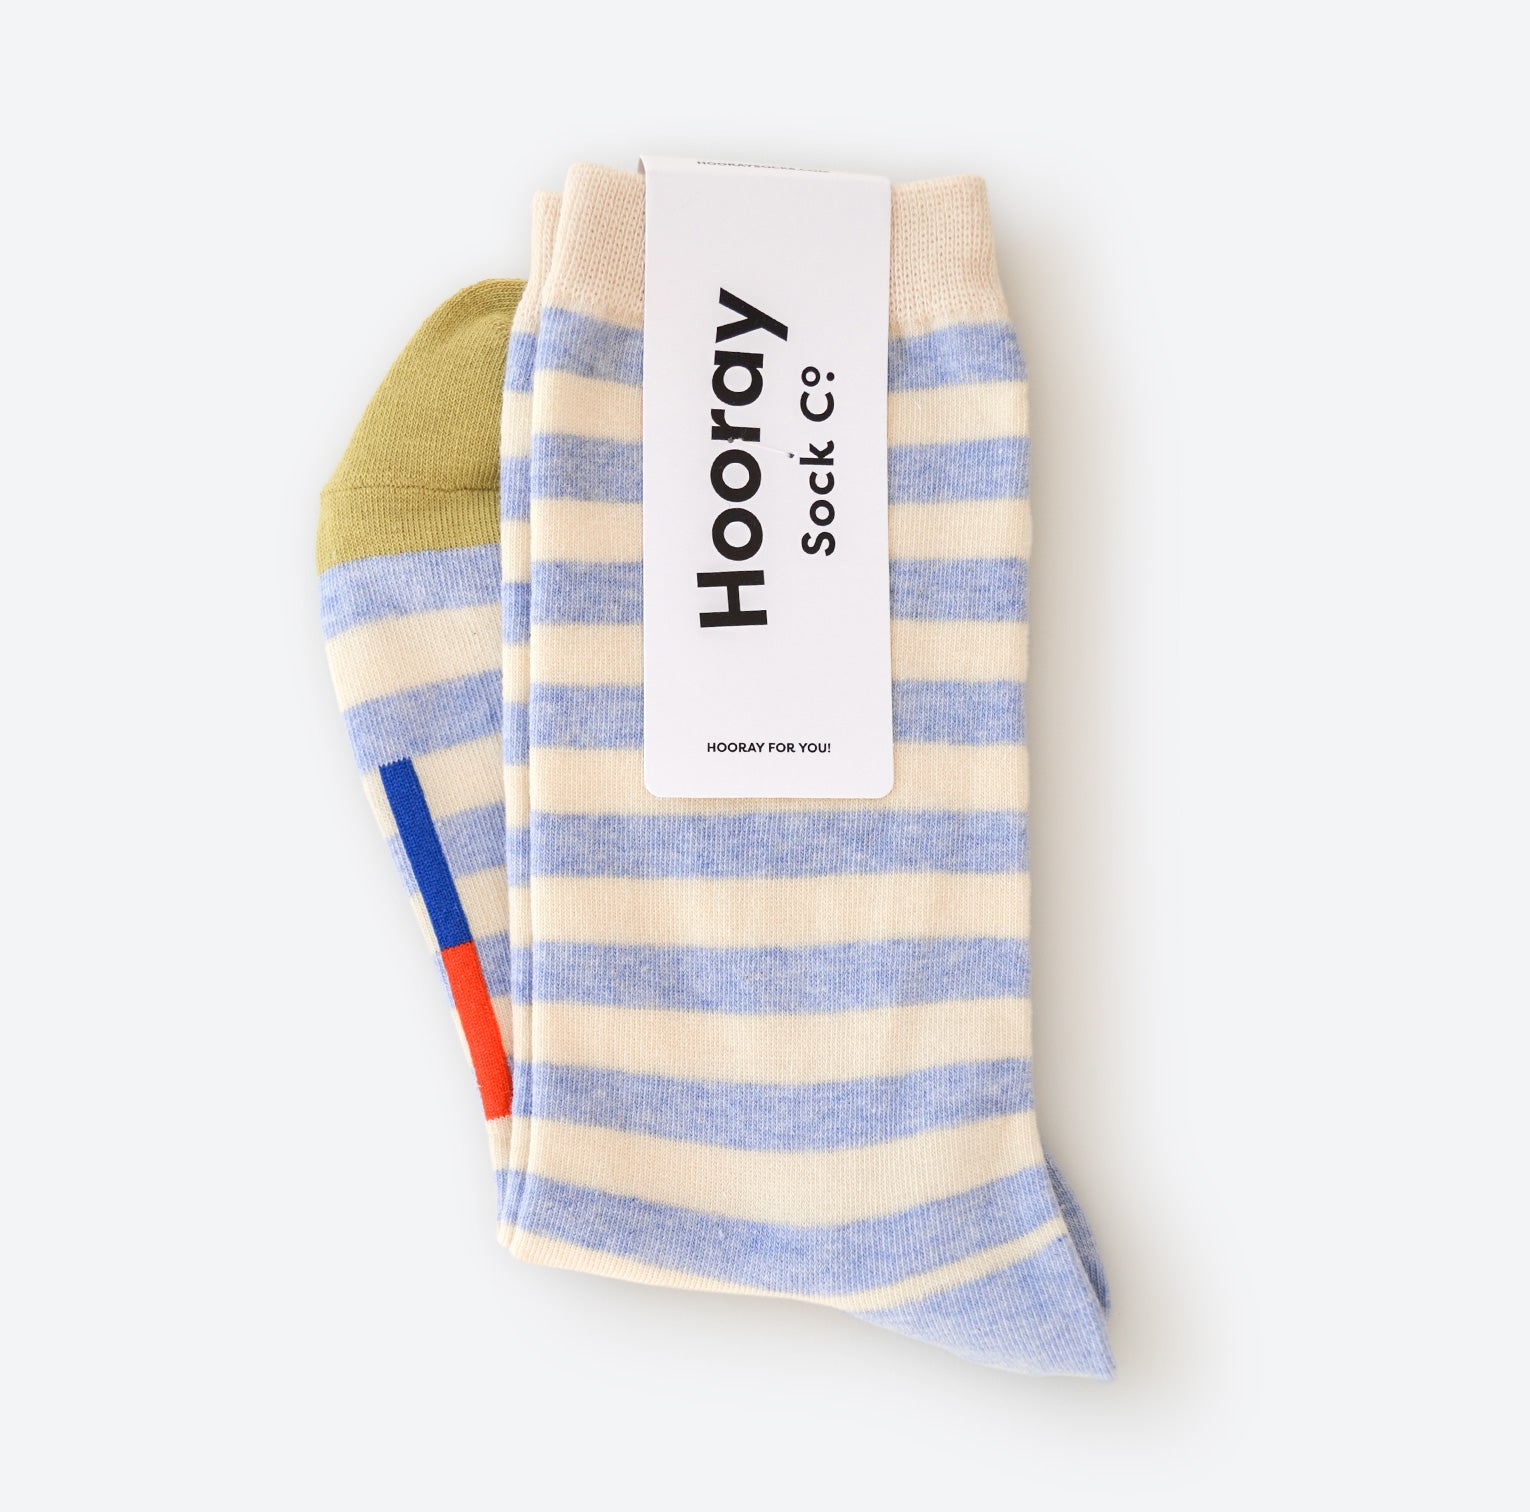 A delightful photograph showcasing our Greenwich Hooray Socks, a perfect blend of comfort and style. These crew socks feature a classic light blue and white stripe pattern with signature color bars. Crafted with 80% cotton and 20% spandex, they offer a lightweight and cozy feel. Made in South Korea, these unisex socks are available in two sizes: Large (Men's 8-12) and Small (Women's 4-10). Machine washable, no ironing needed; simply line dry for best results.